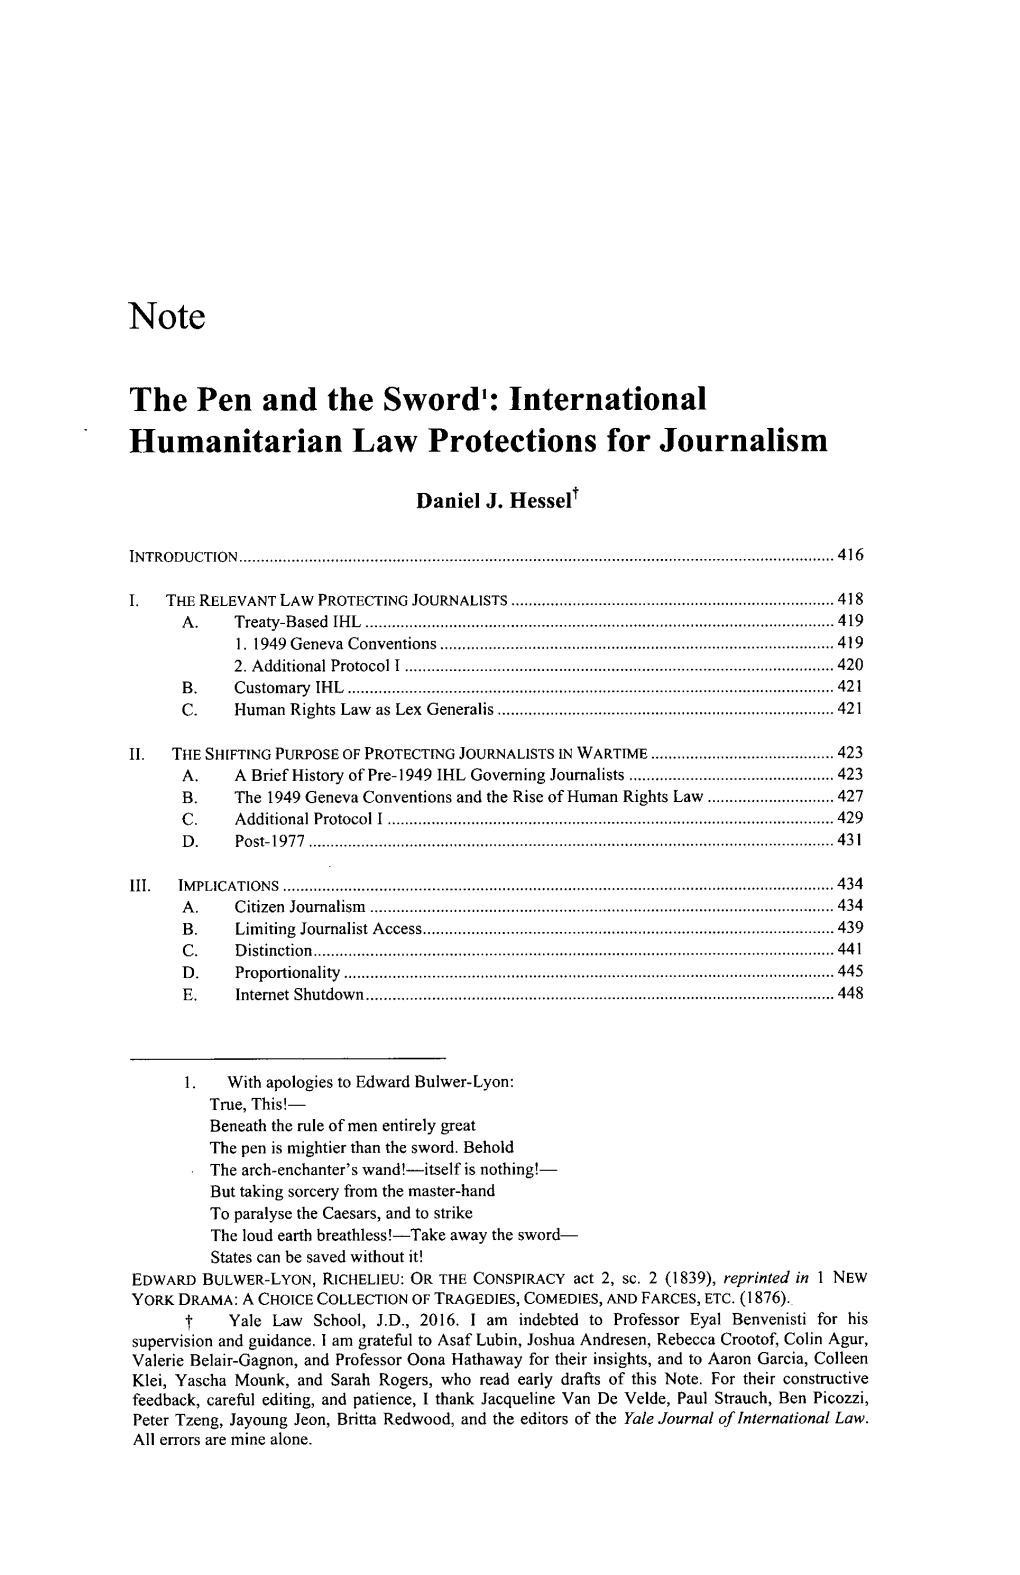 International Humanitarian Law Protections for Journalism